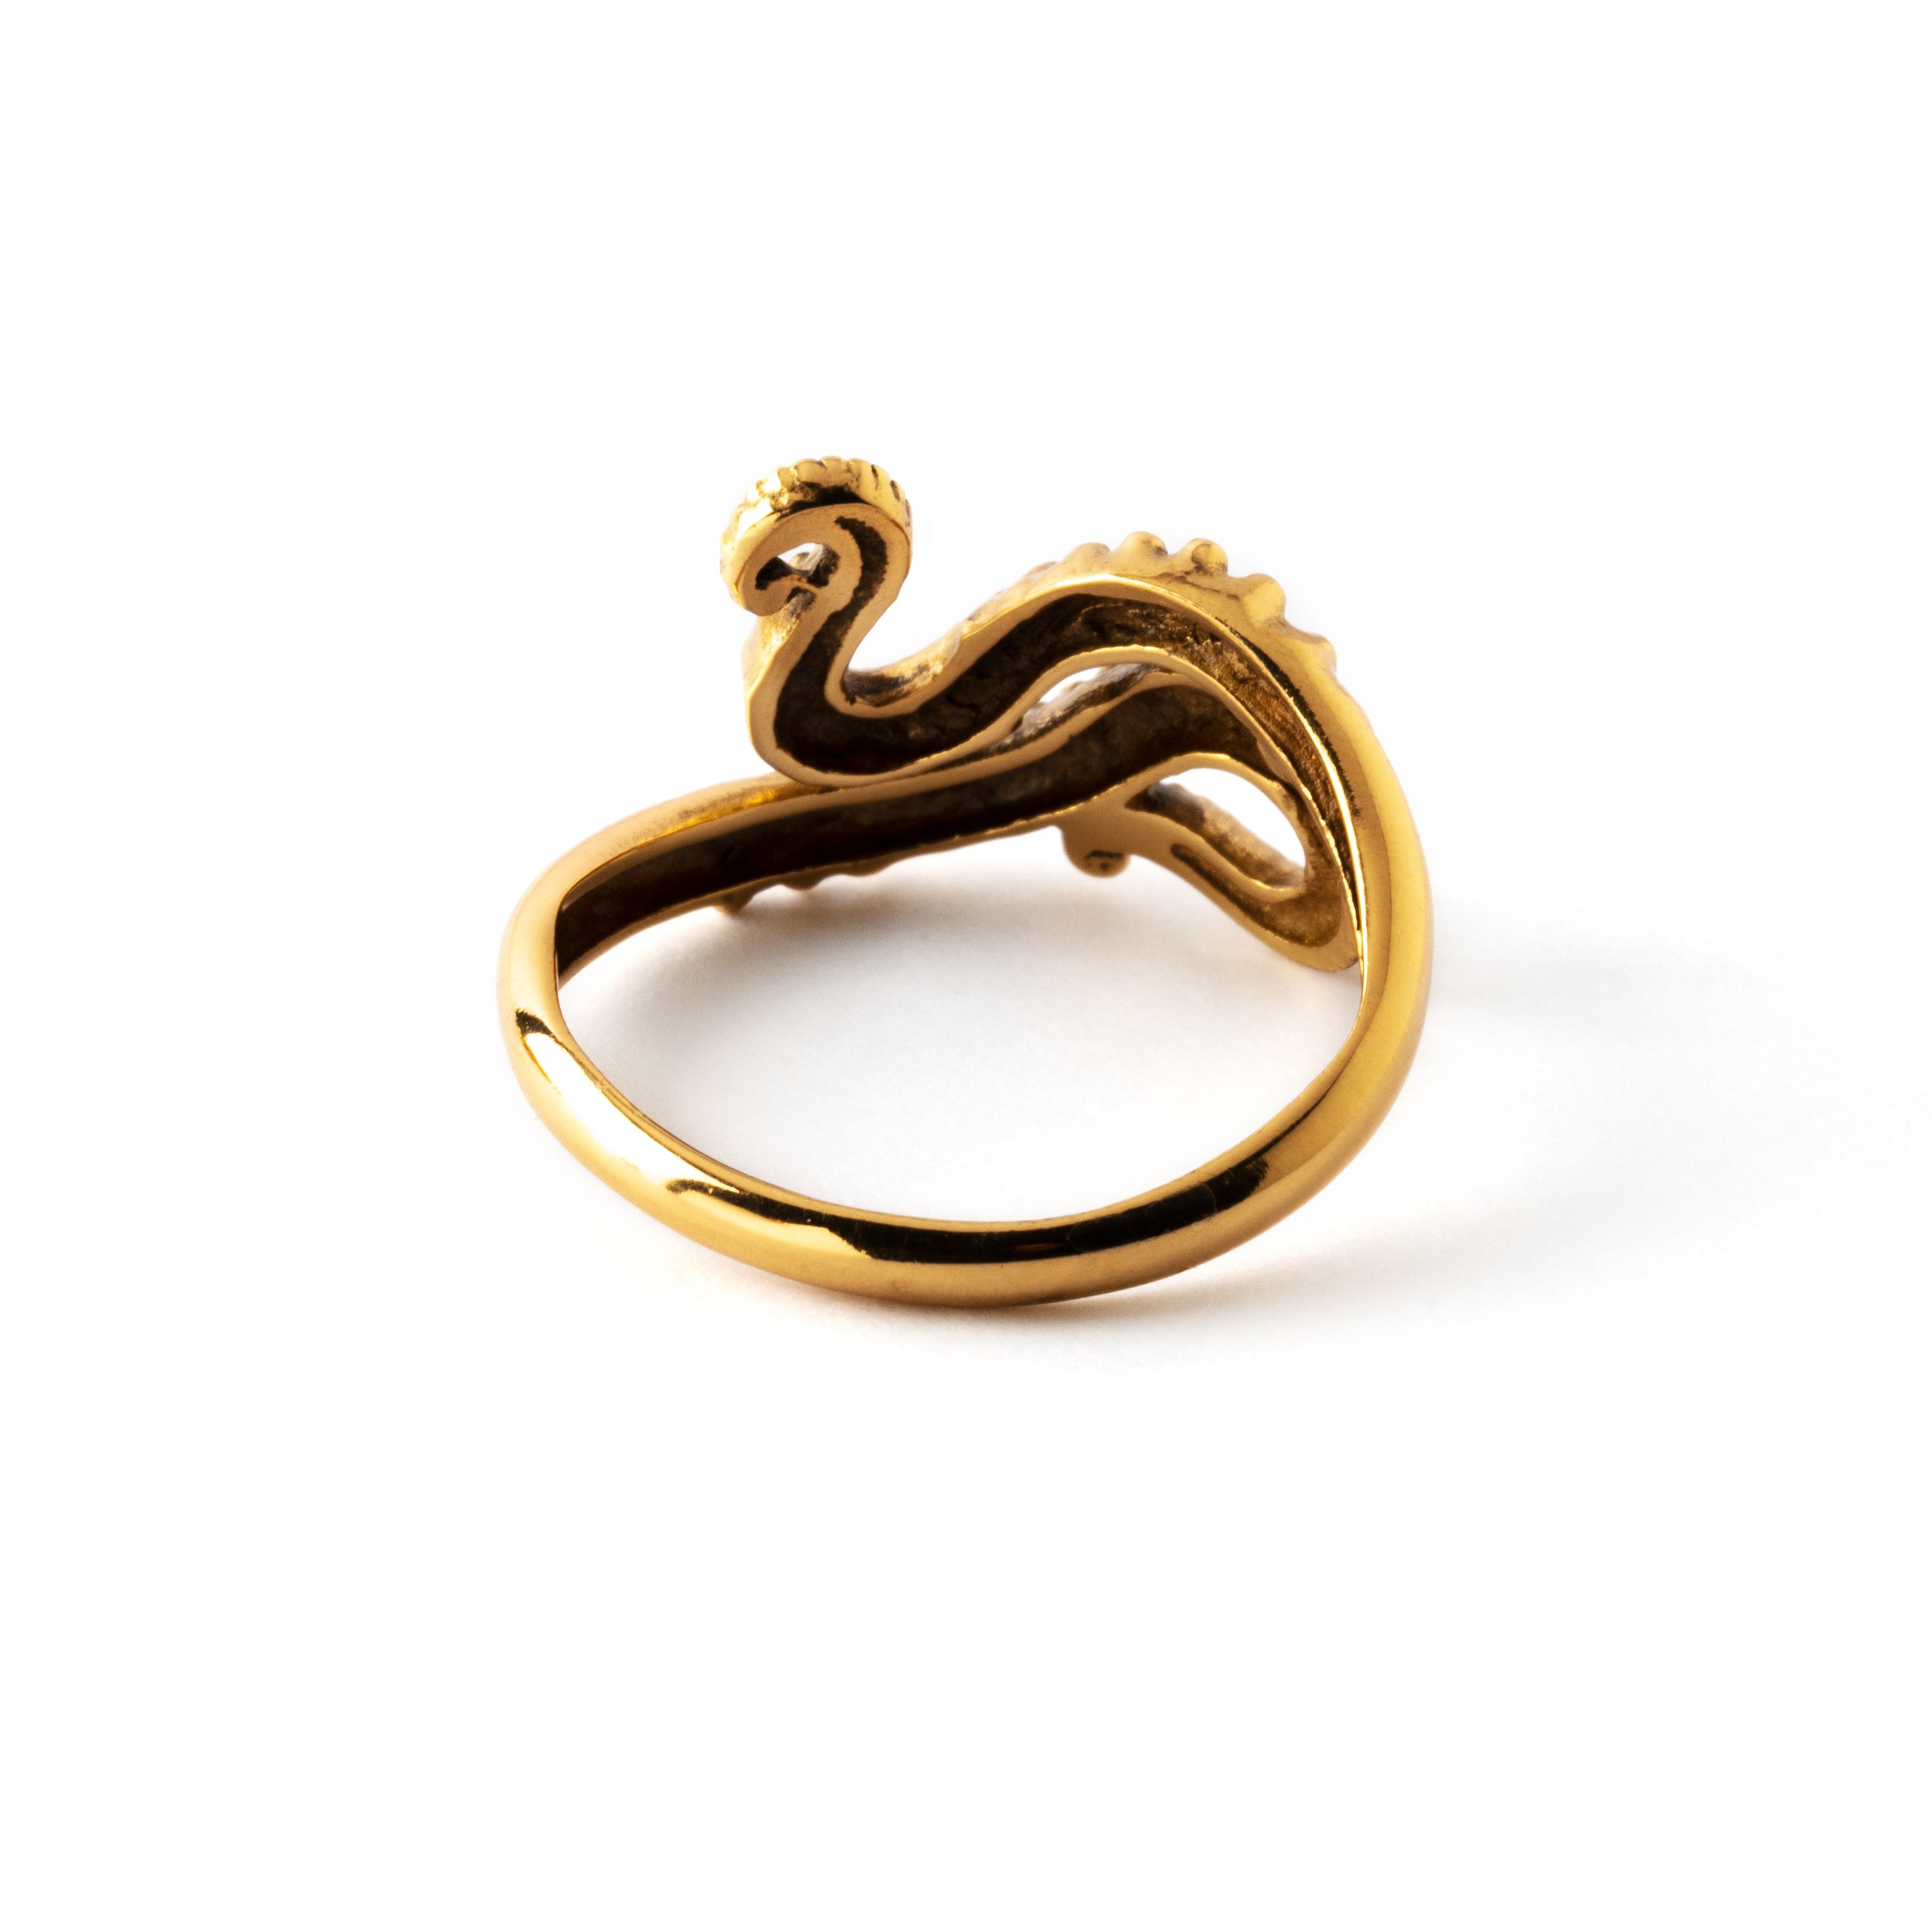 Bronze octopus tentacles wrap ring back view